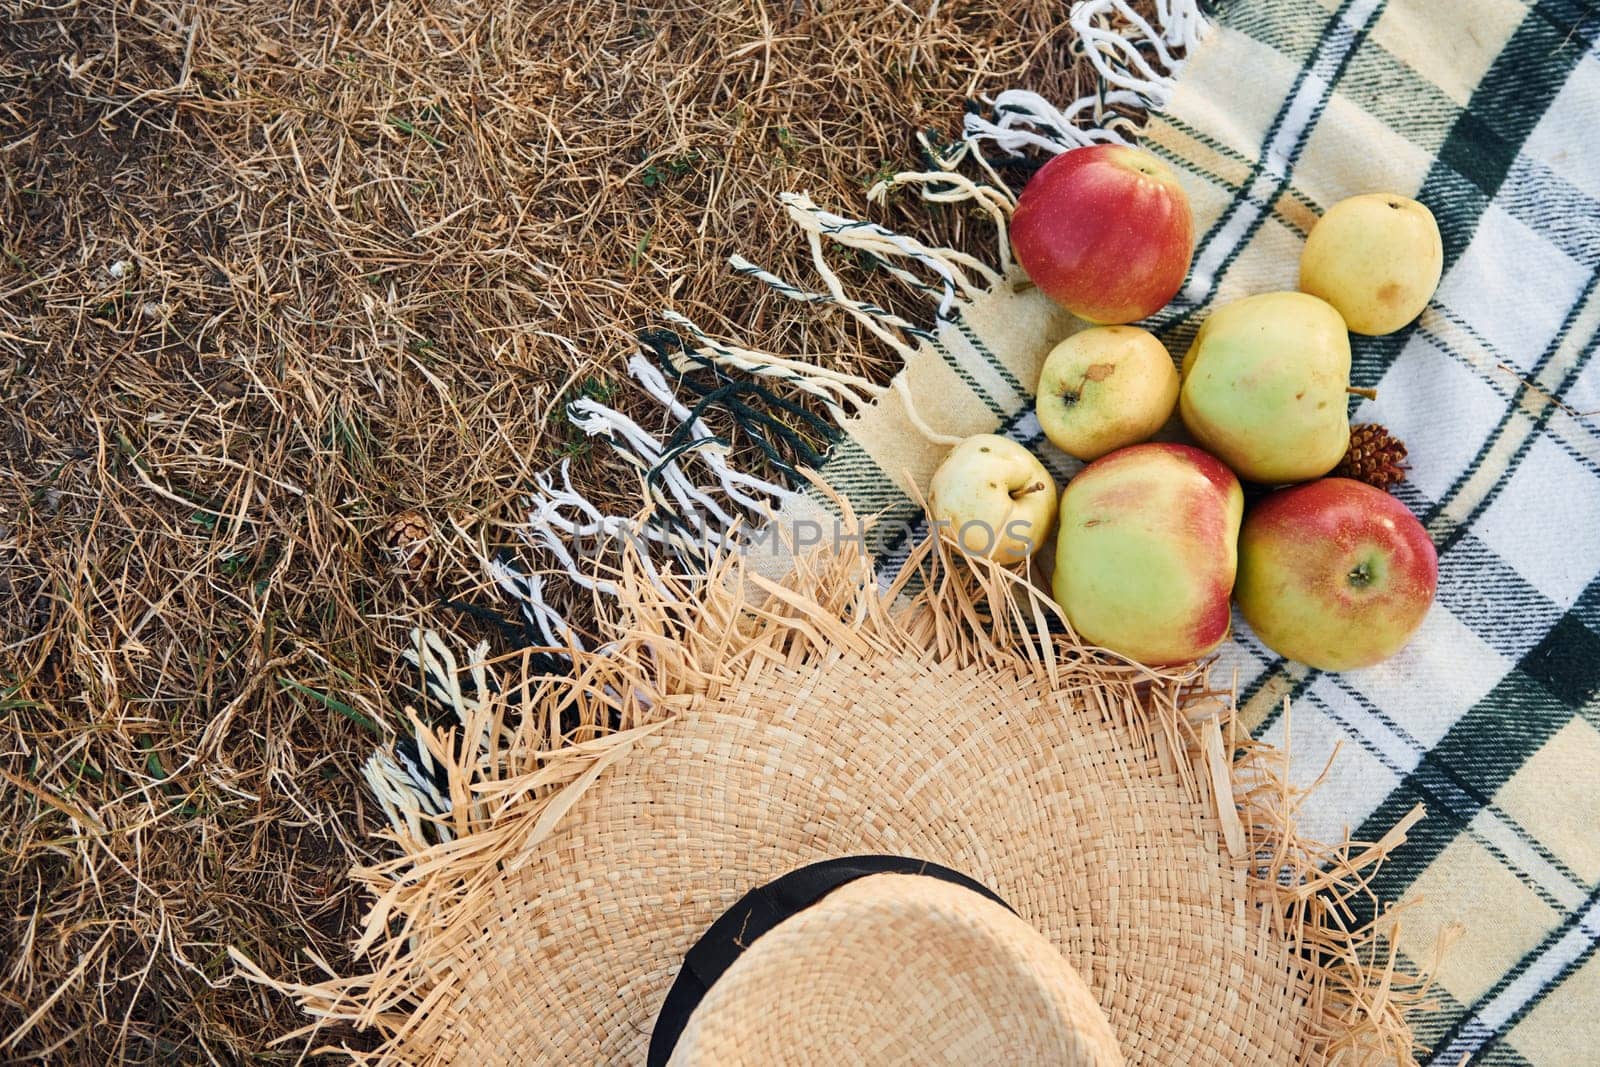 Top view of fresh apples and straw hat that lying down on picnic cloth outdoors.